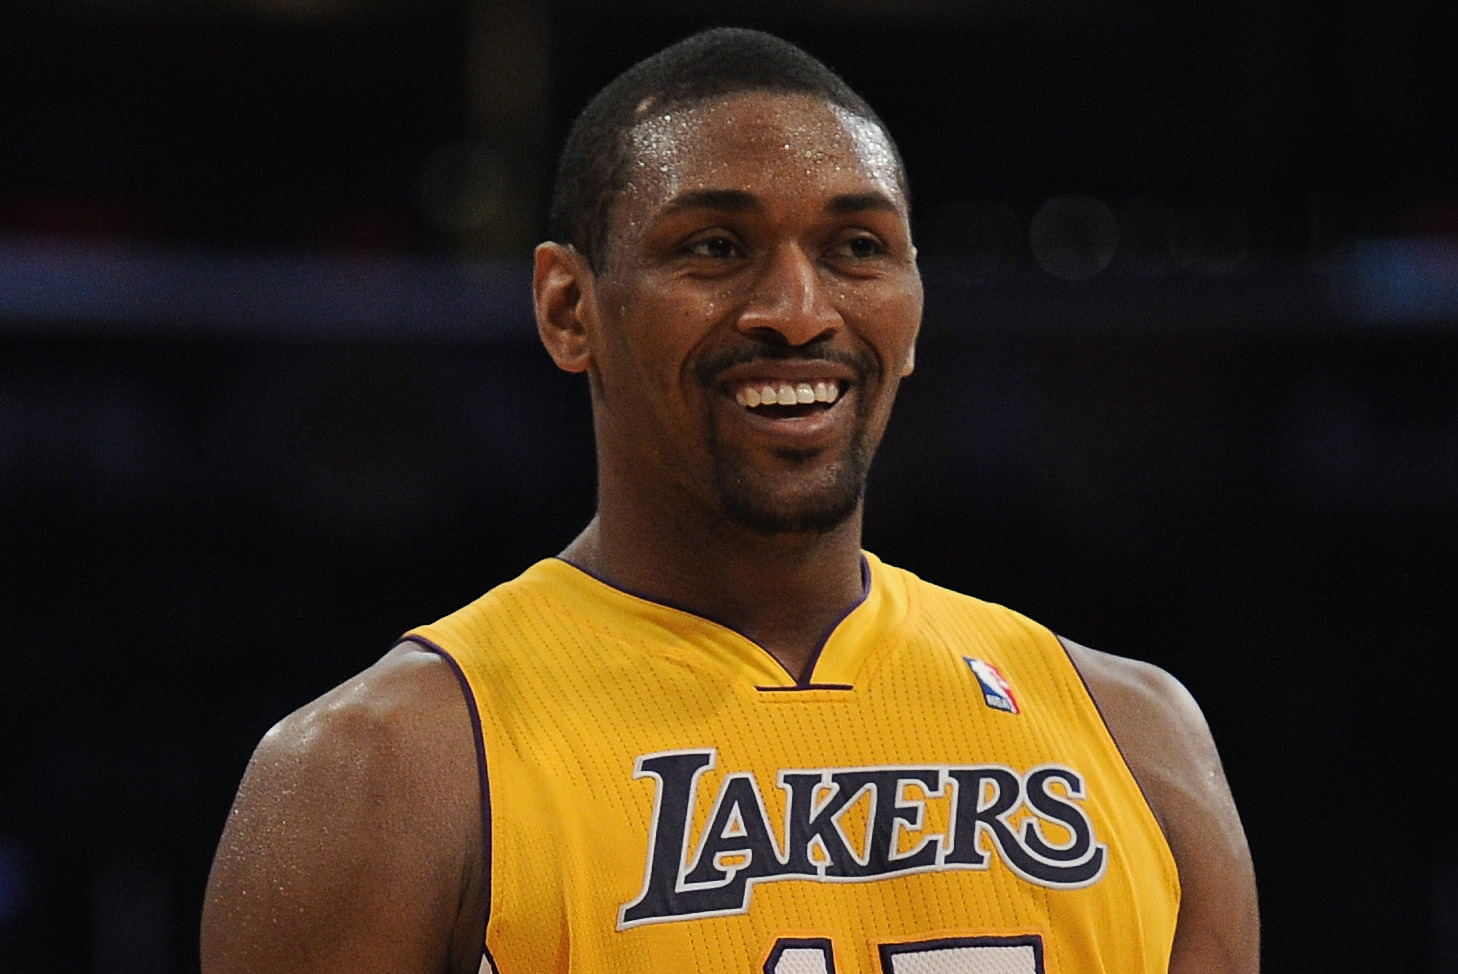 Metta World Peace says the Lakers want to go 73-9 - Sports Illustrated